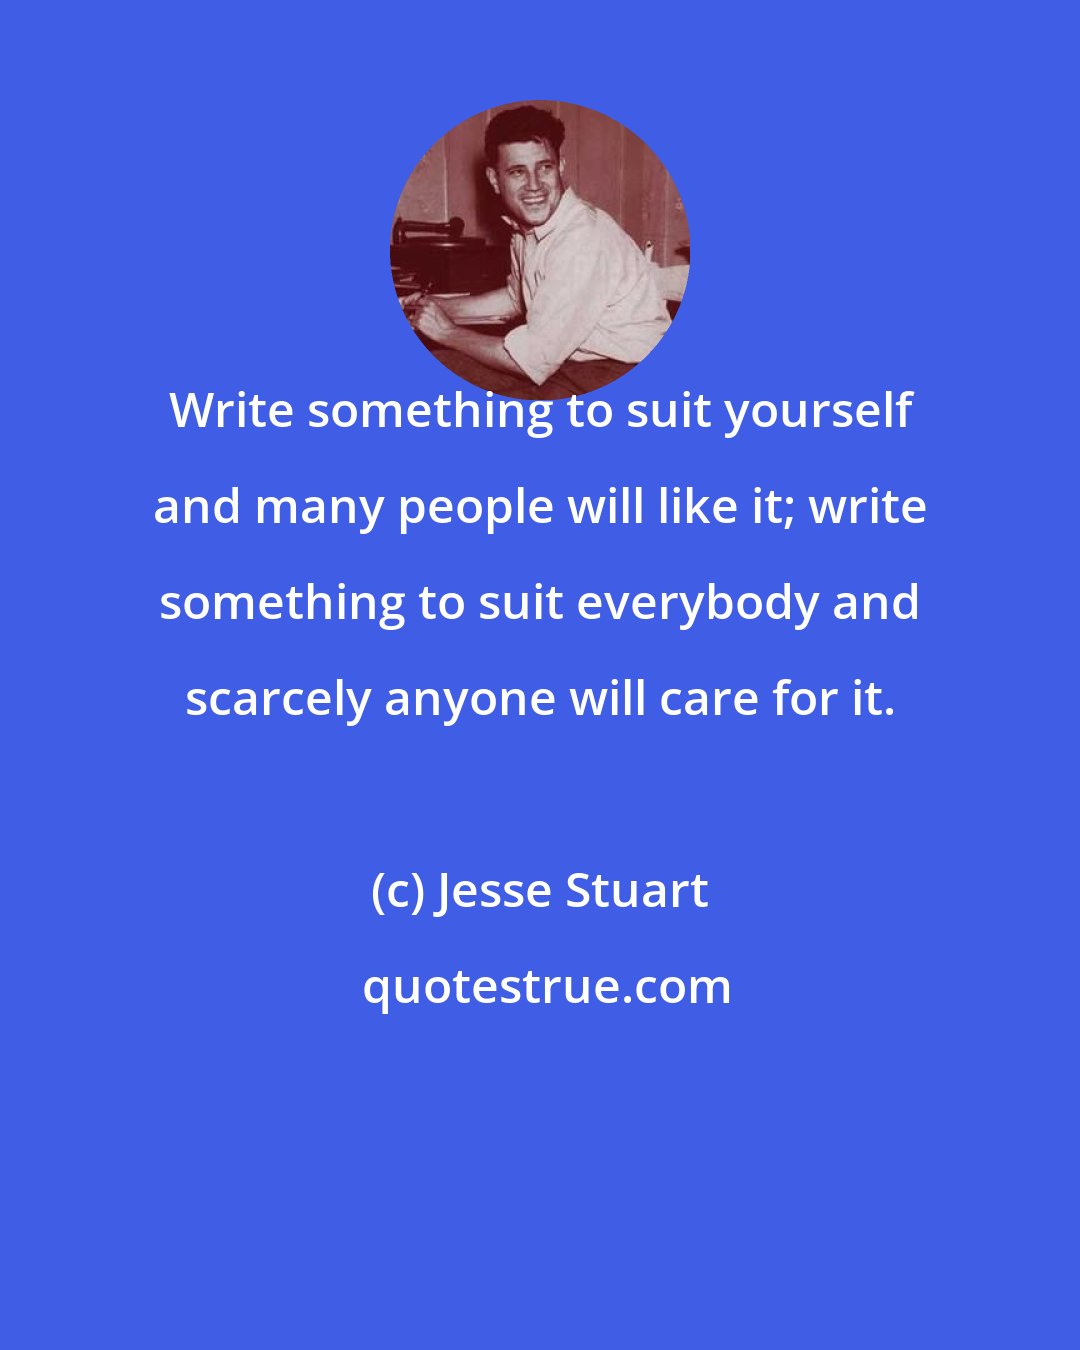 Jesse Stuart: Write something to suit yourself and many people will like it; write something to suit everybody and scarcely anyone will care for it.